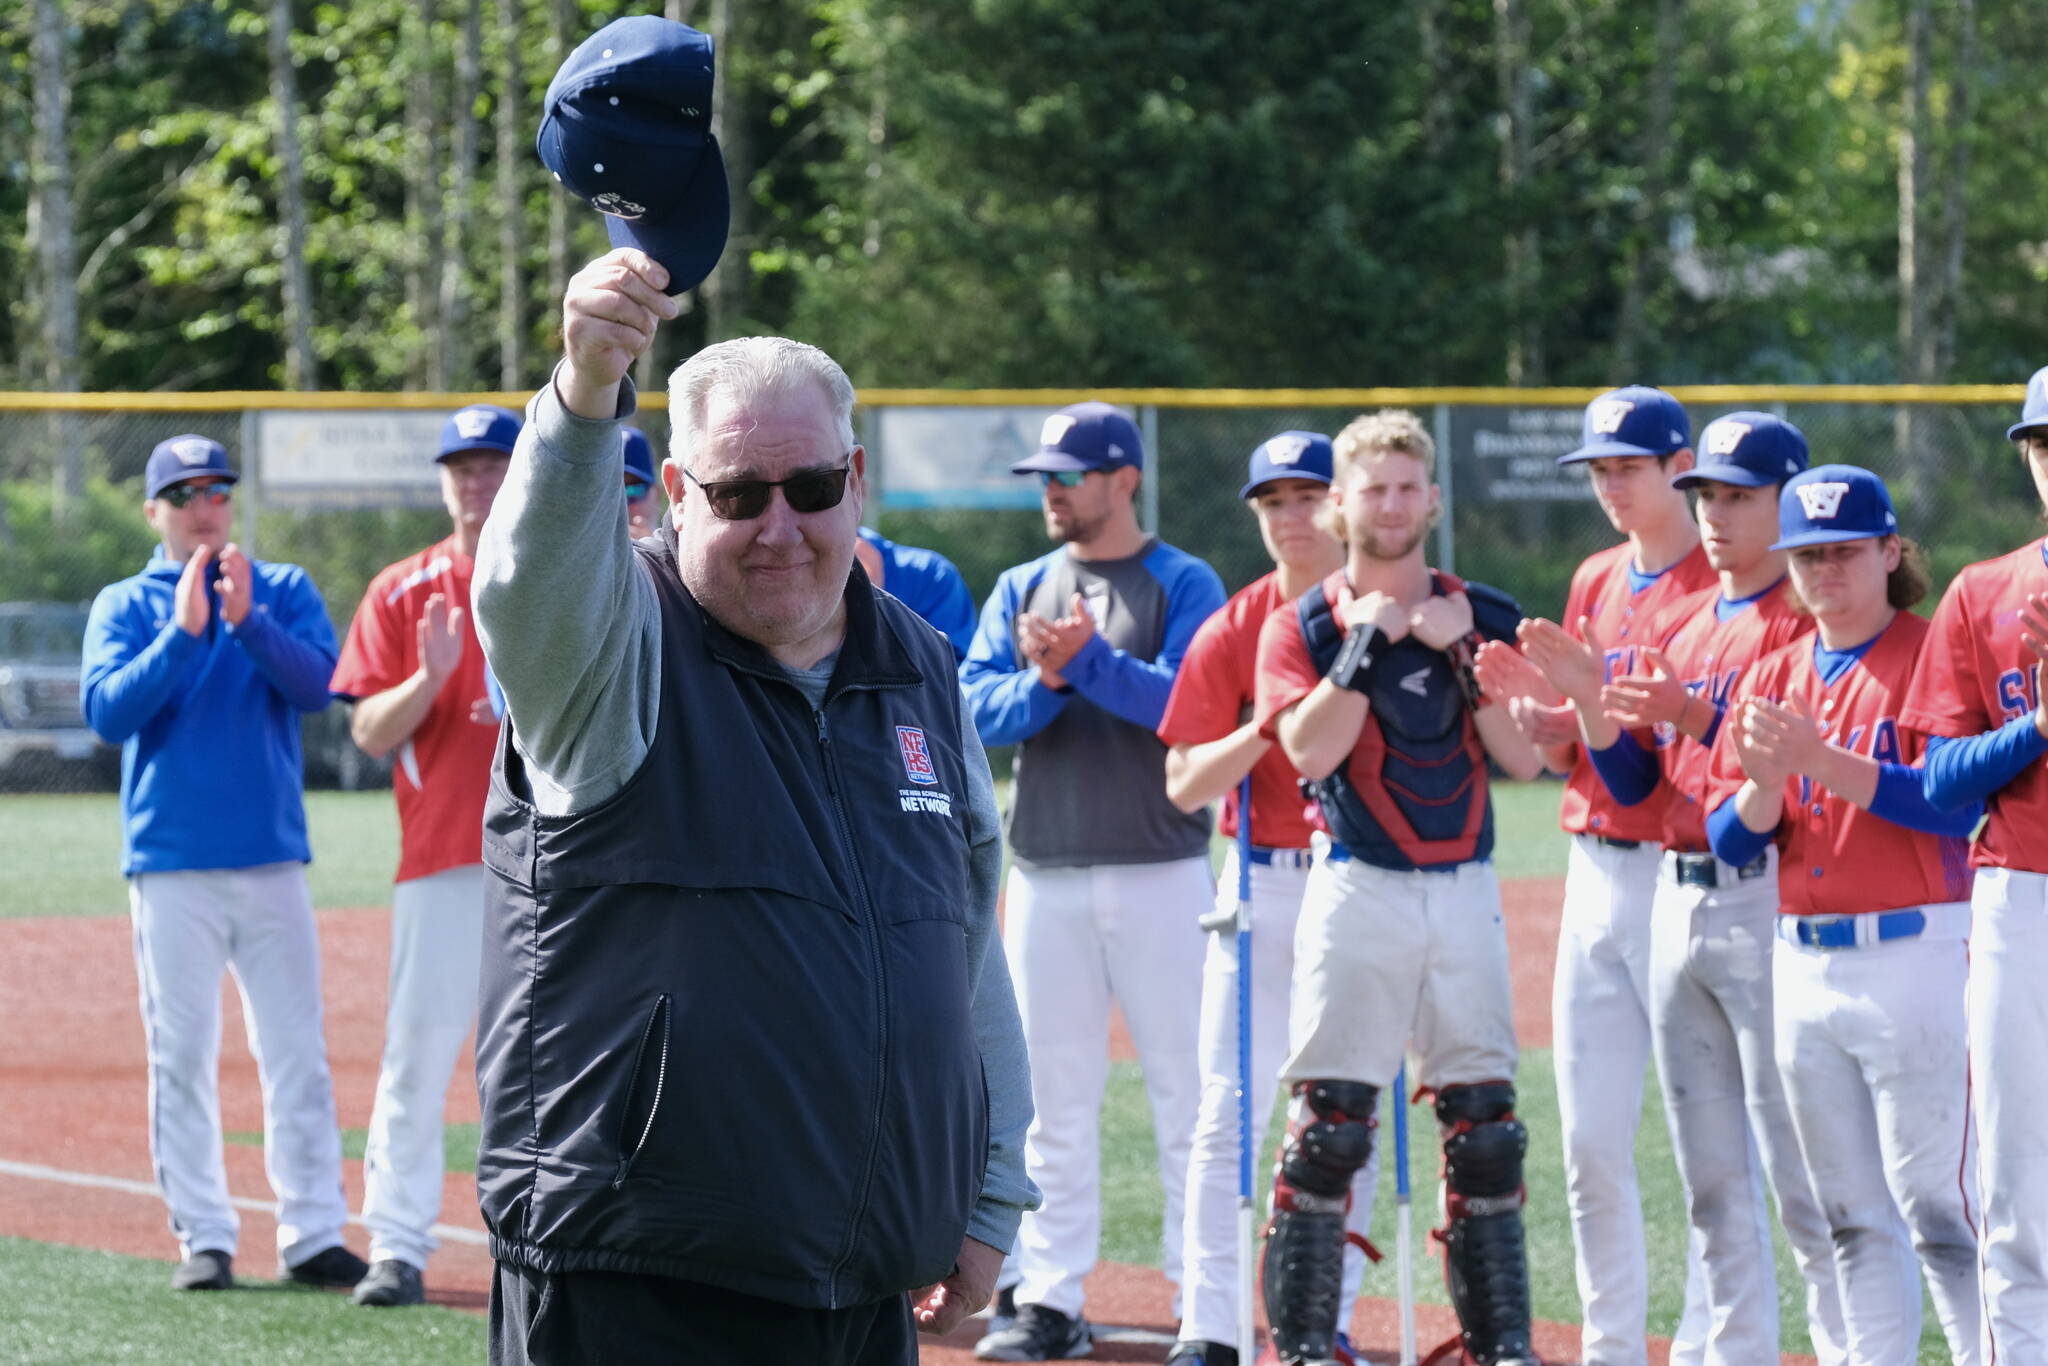 Bob Barger tips his cap after being honored Saturday, June 3, at the 2023 Alaska School Activities Association Baseball State Championships on Sitka’s Moller Field for his lifetime of sports broadcasting in Alaska. (Klas Stolpe for the Juneau Empire)